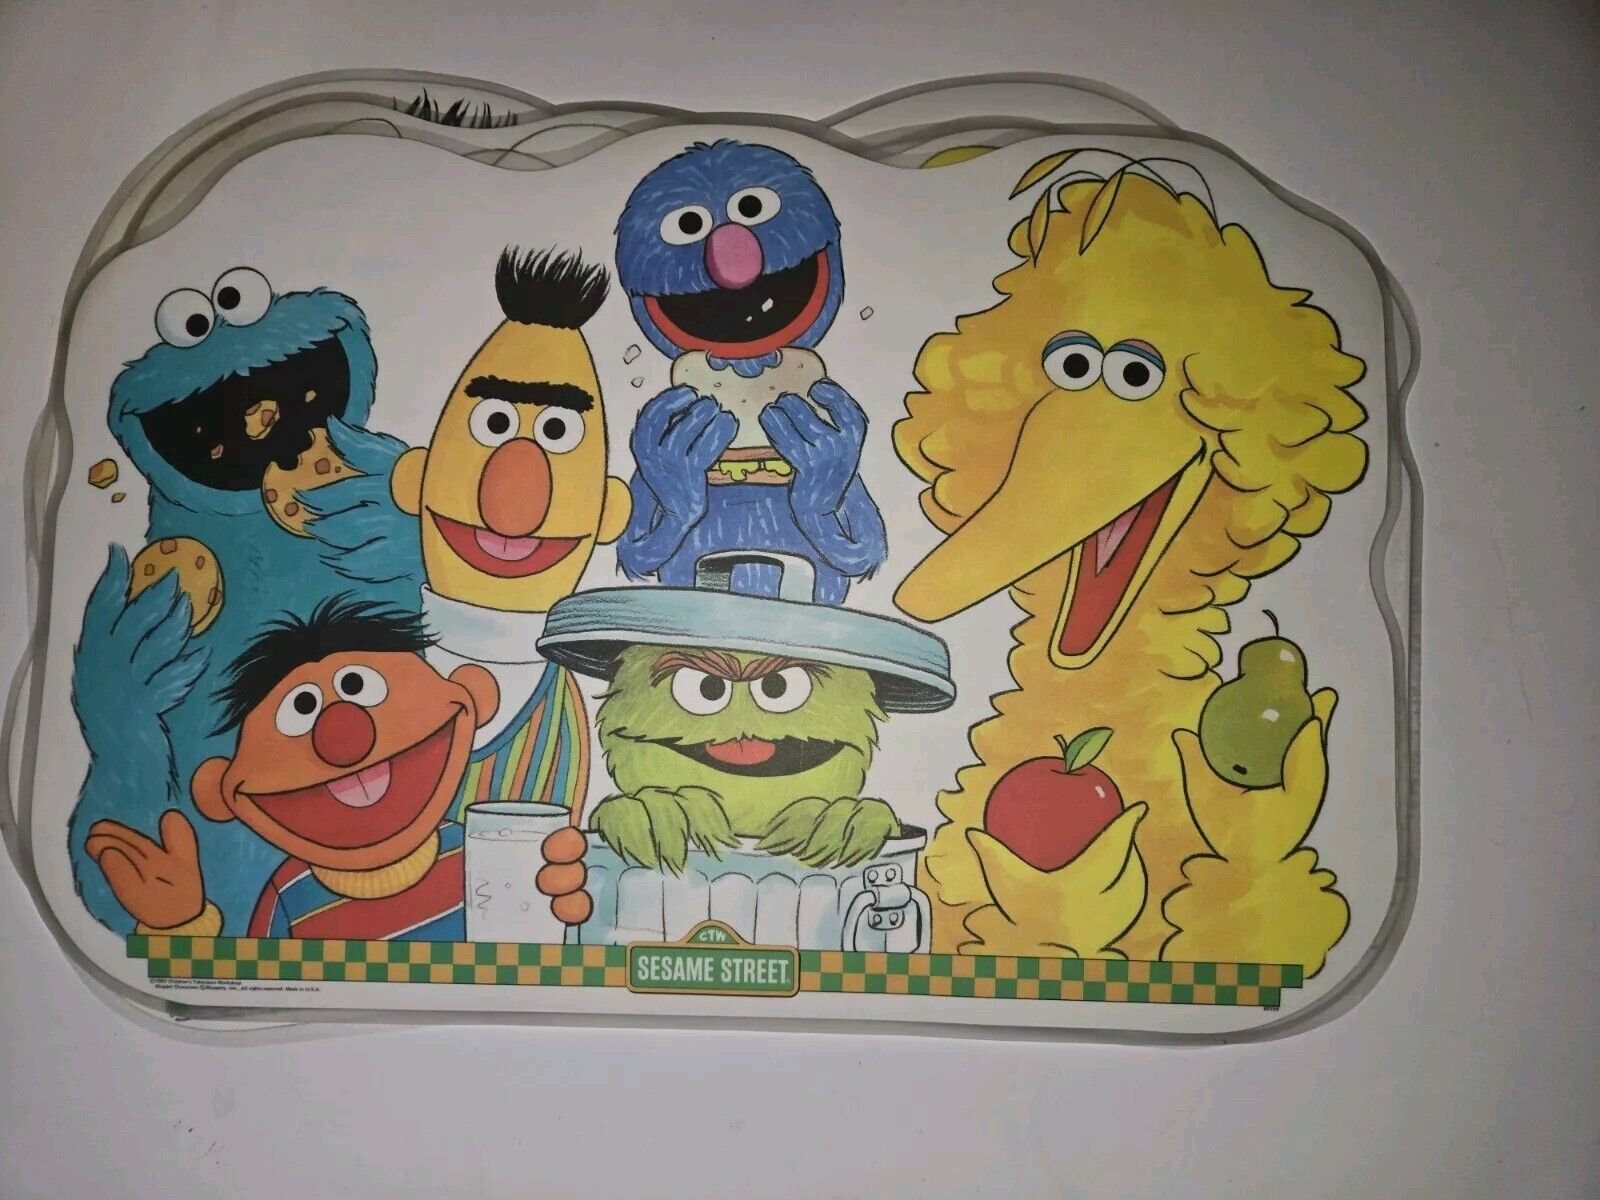  4 Vintage 1982 Sesame Street Double-Sided Activity Placemat 17 1/2